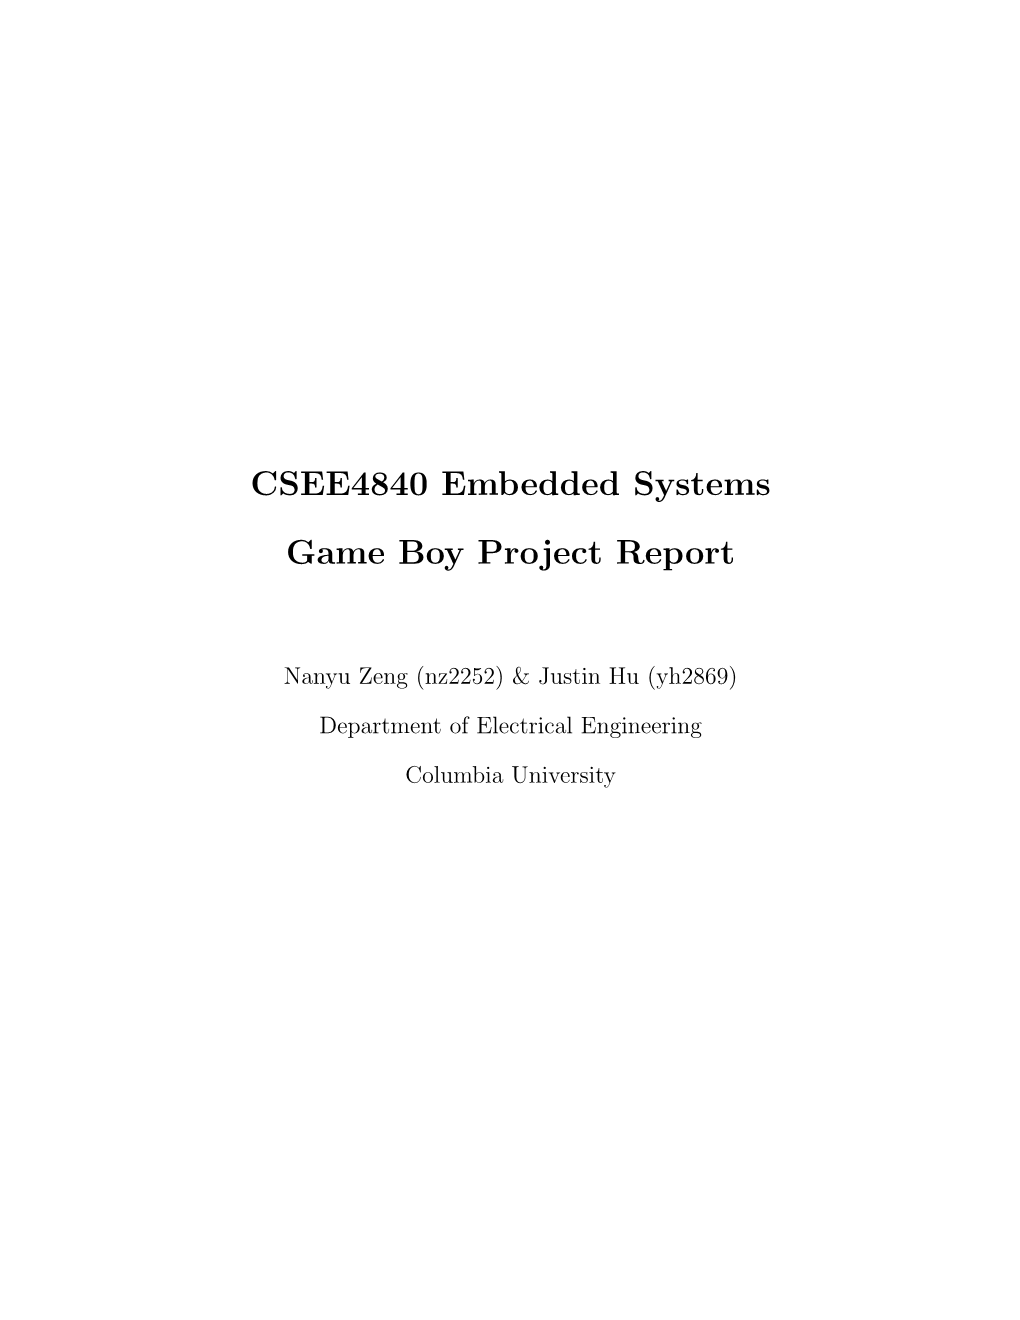 CSEE4840 Embedded Systems Game Boy Project Report